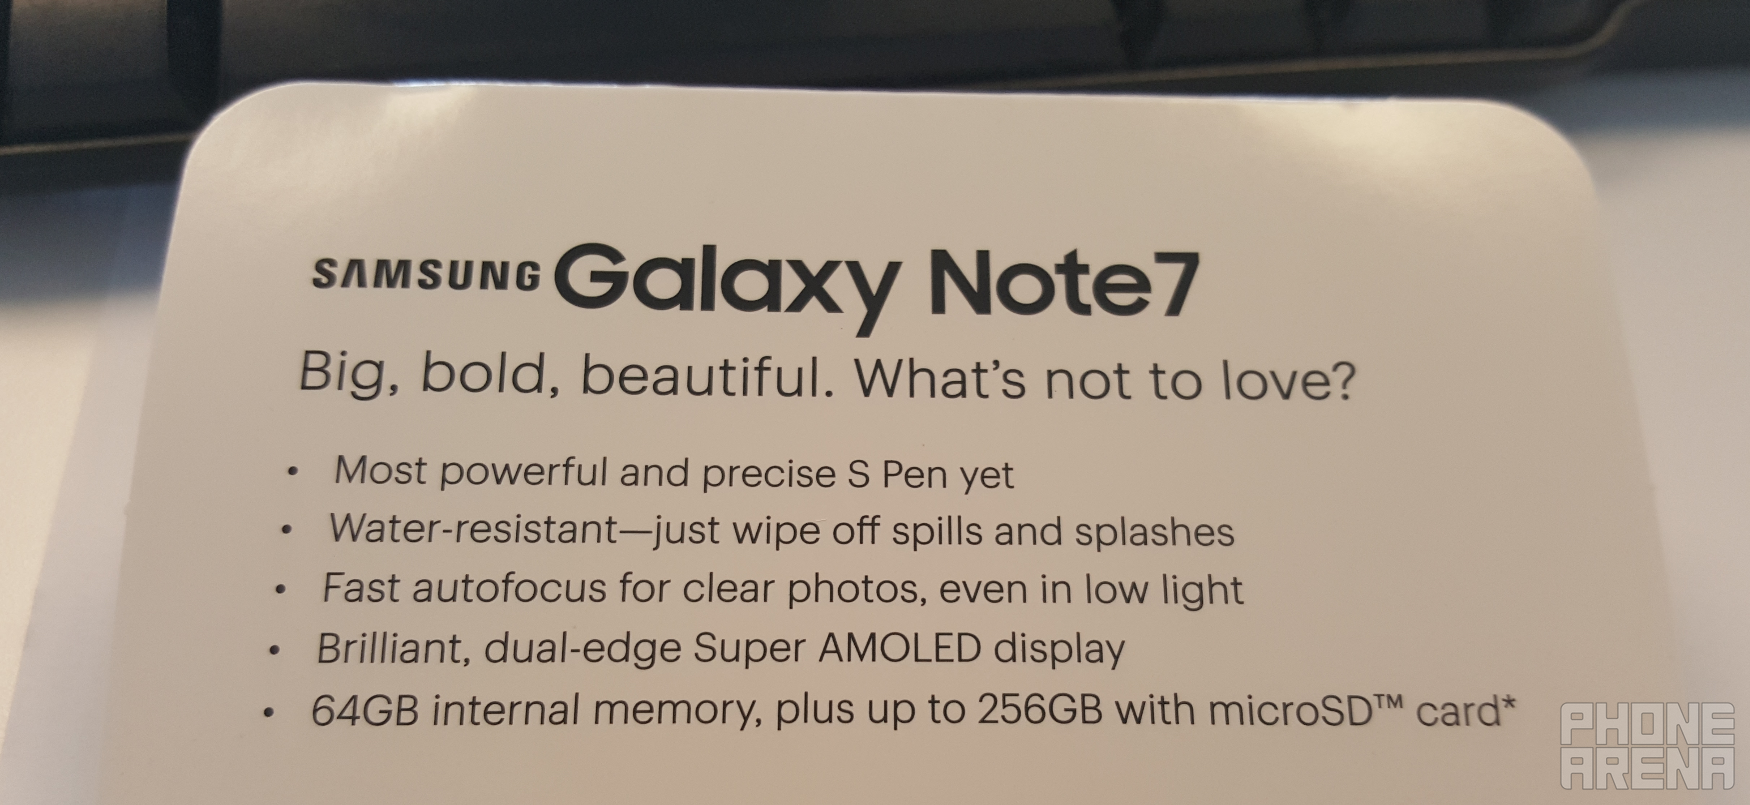 Sprint planogram for the Samsung Galaxy Note 7 reveals some information about the phablet - Sprint planogram calls Samsung Galaxy Note 7 &quot;big, bold, beautiful,&quot; reveals several features